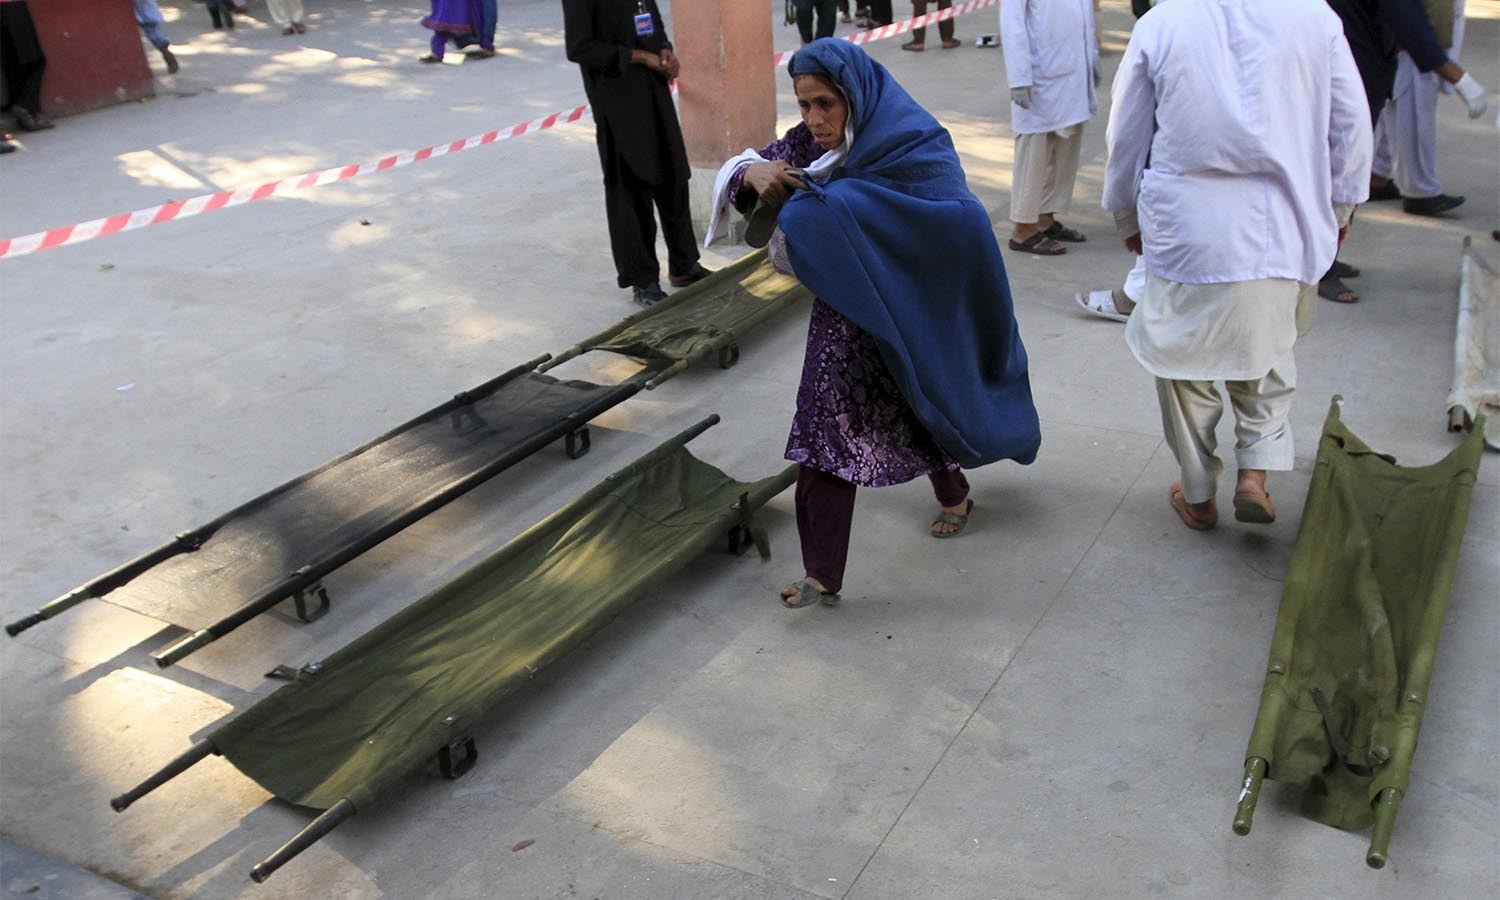 An Afghan woman rushes to a hospital to check on her daughter who was injured, after an earthquake at a hospital in Jalalabad, Afghanistan October 26, 2015. A powerful earthquake struck a remote area of northeastern Afghanistan on Monday, shaking the capital Kabul, as shockwaves were felt in northern India and in Pakistan's capital, where hundreds of people ran out of buildings as the ground rolled beneath them. REUTERS/ Parwiz